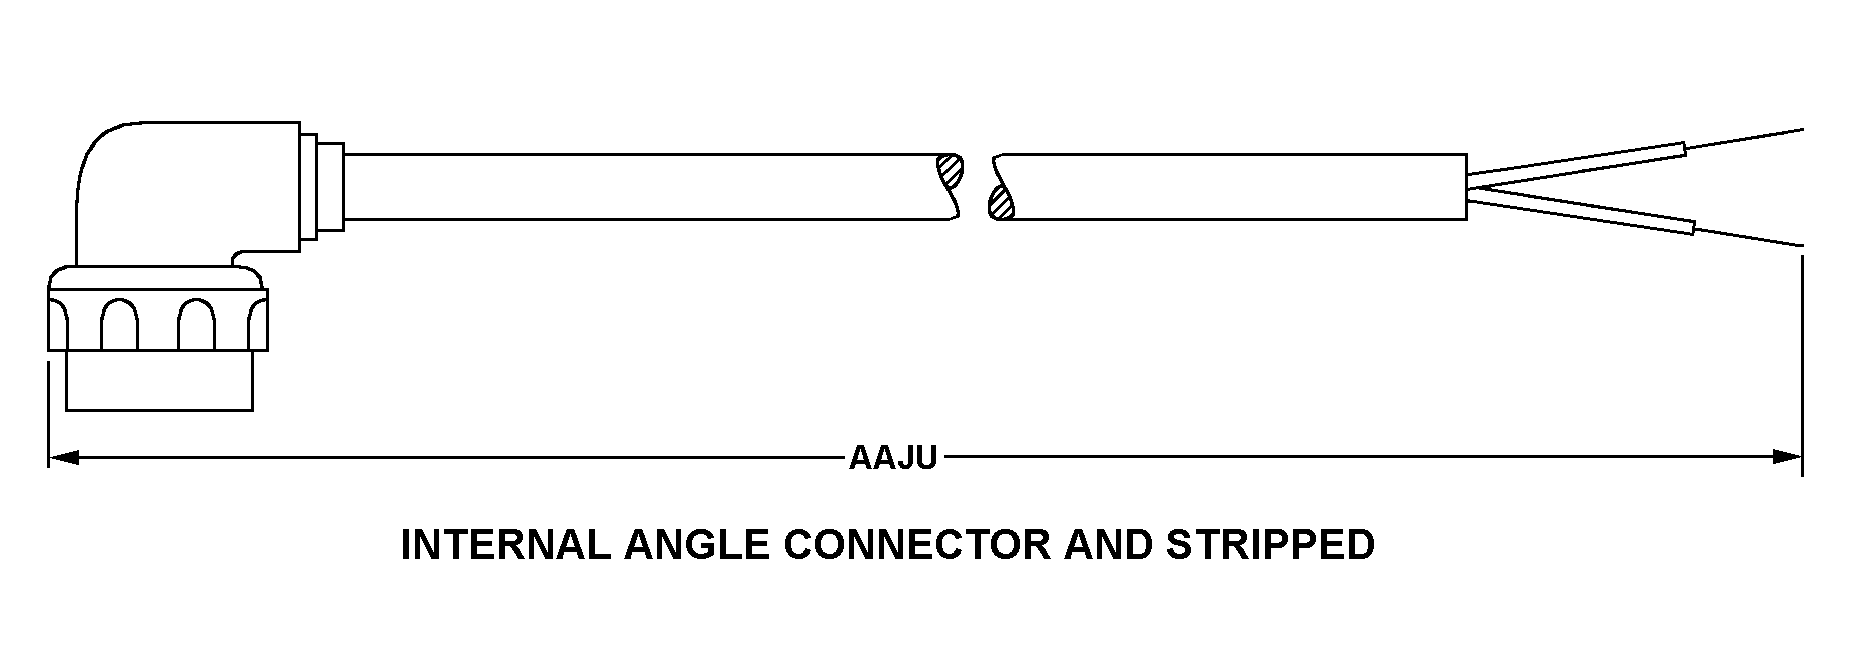 INTERNAL ANGLE CONNECTOR AND STRIPPED style nsn 6150-01-360-9822